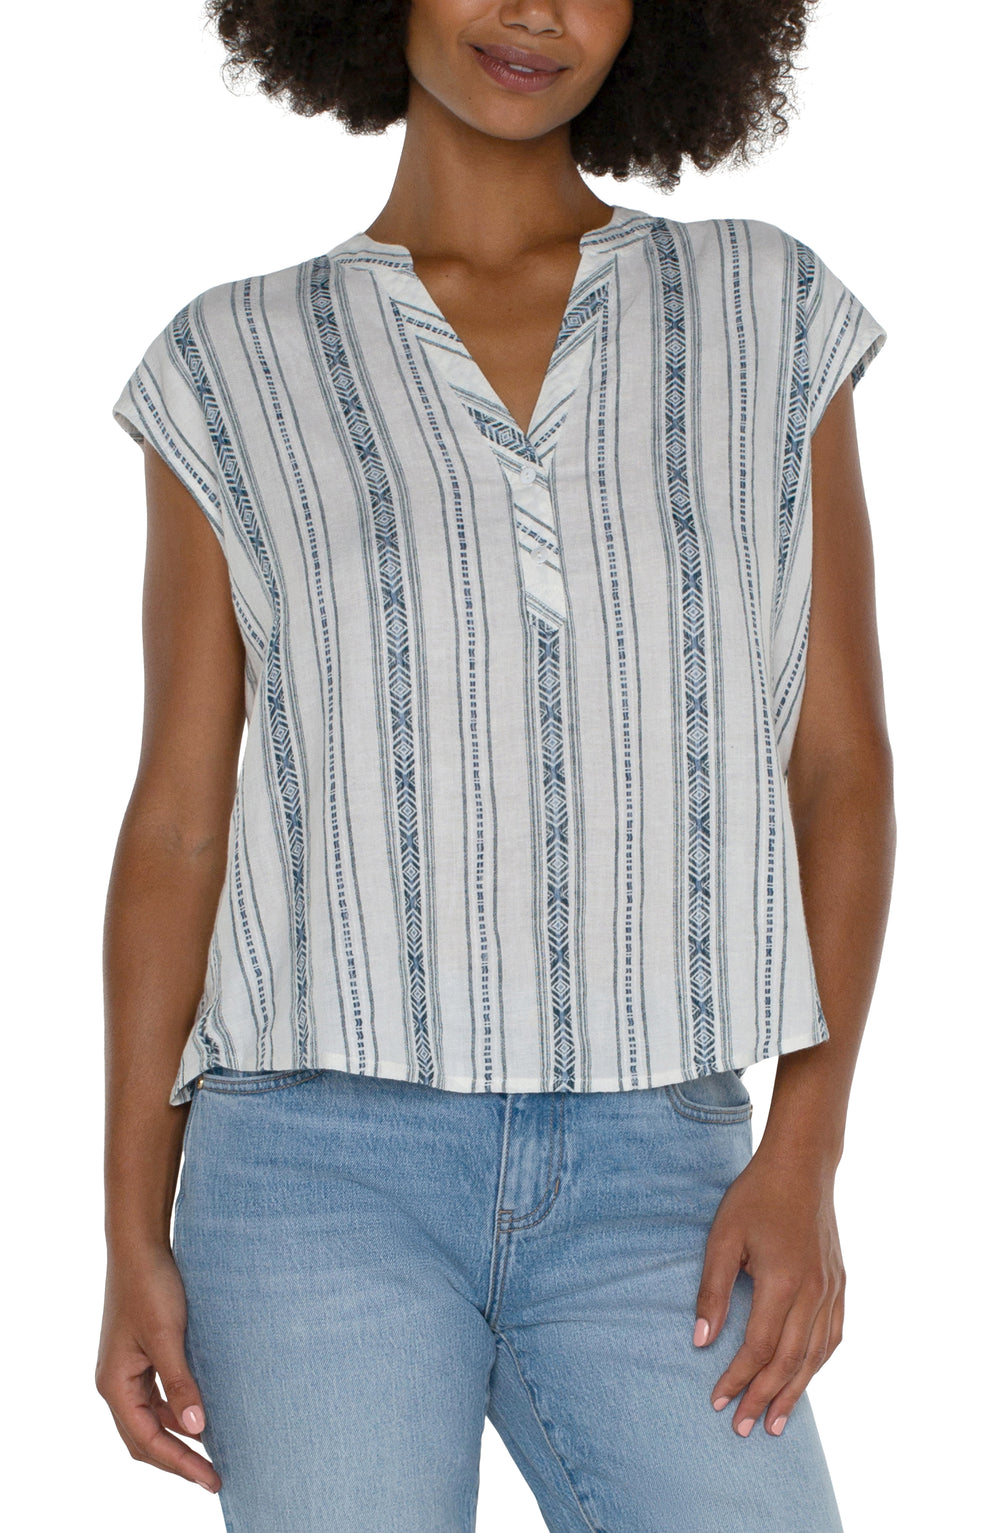 Woven dolman pull-over top in cream with blue stripe - LM8B83WV13 - Tru Blue Boutique